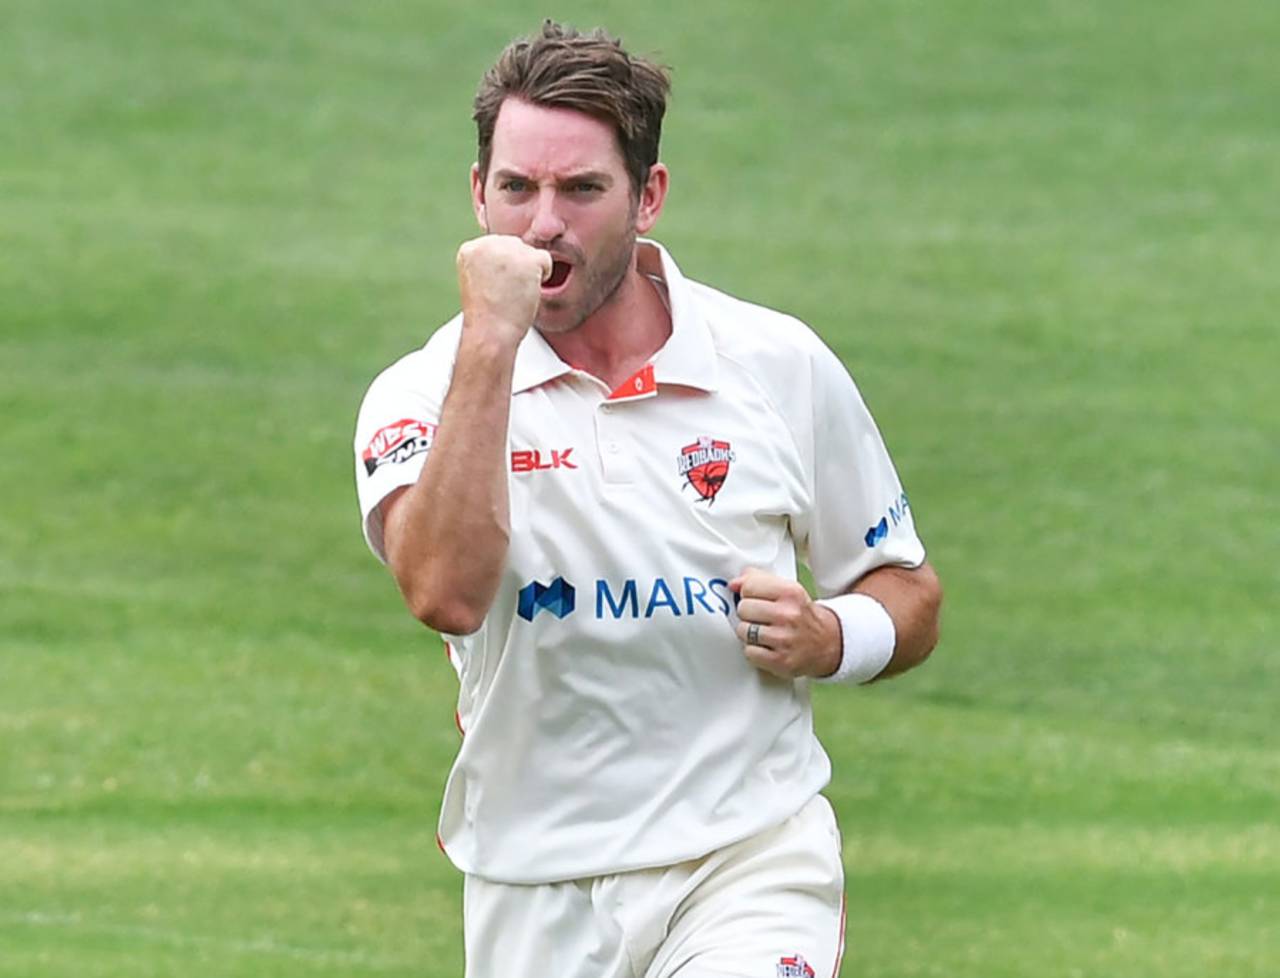 Chadd Sayers claimed his 300th first-class wicket